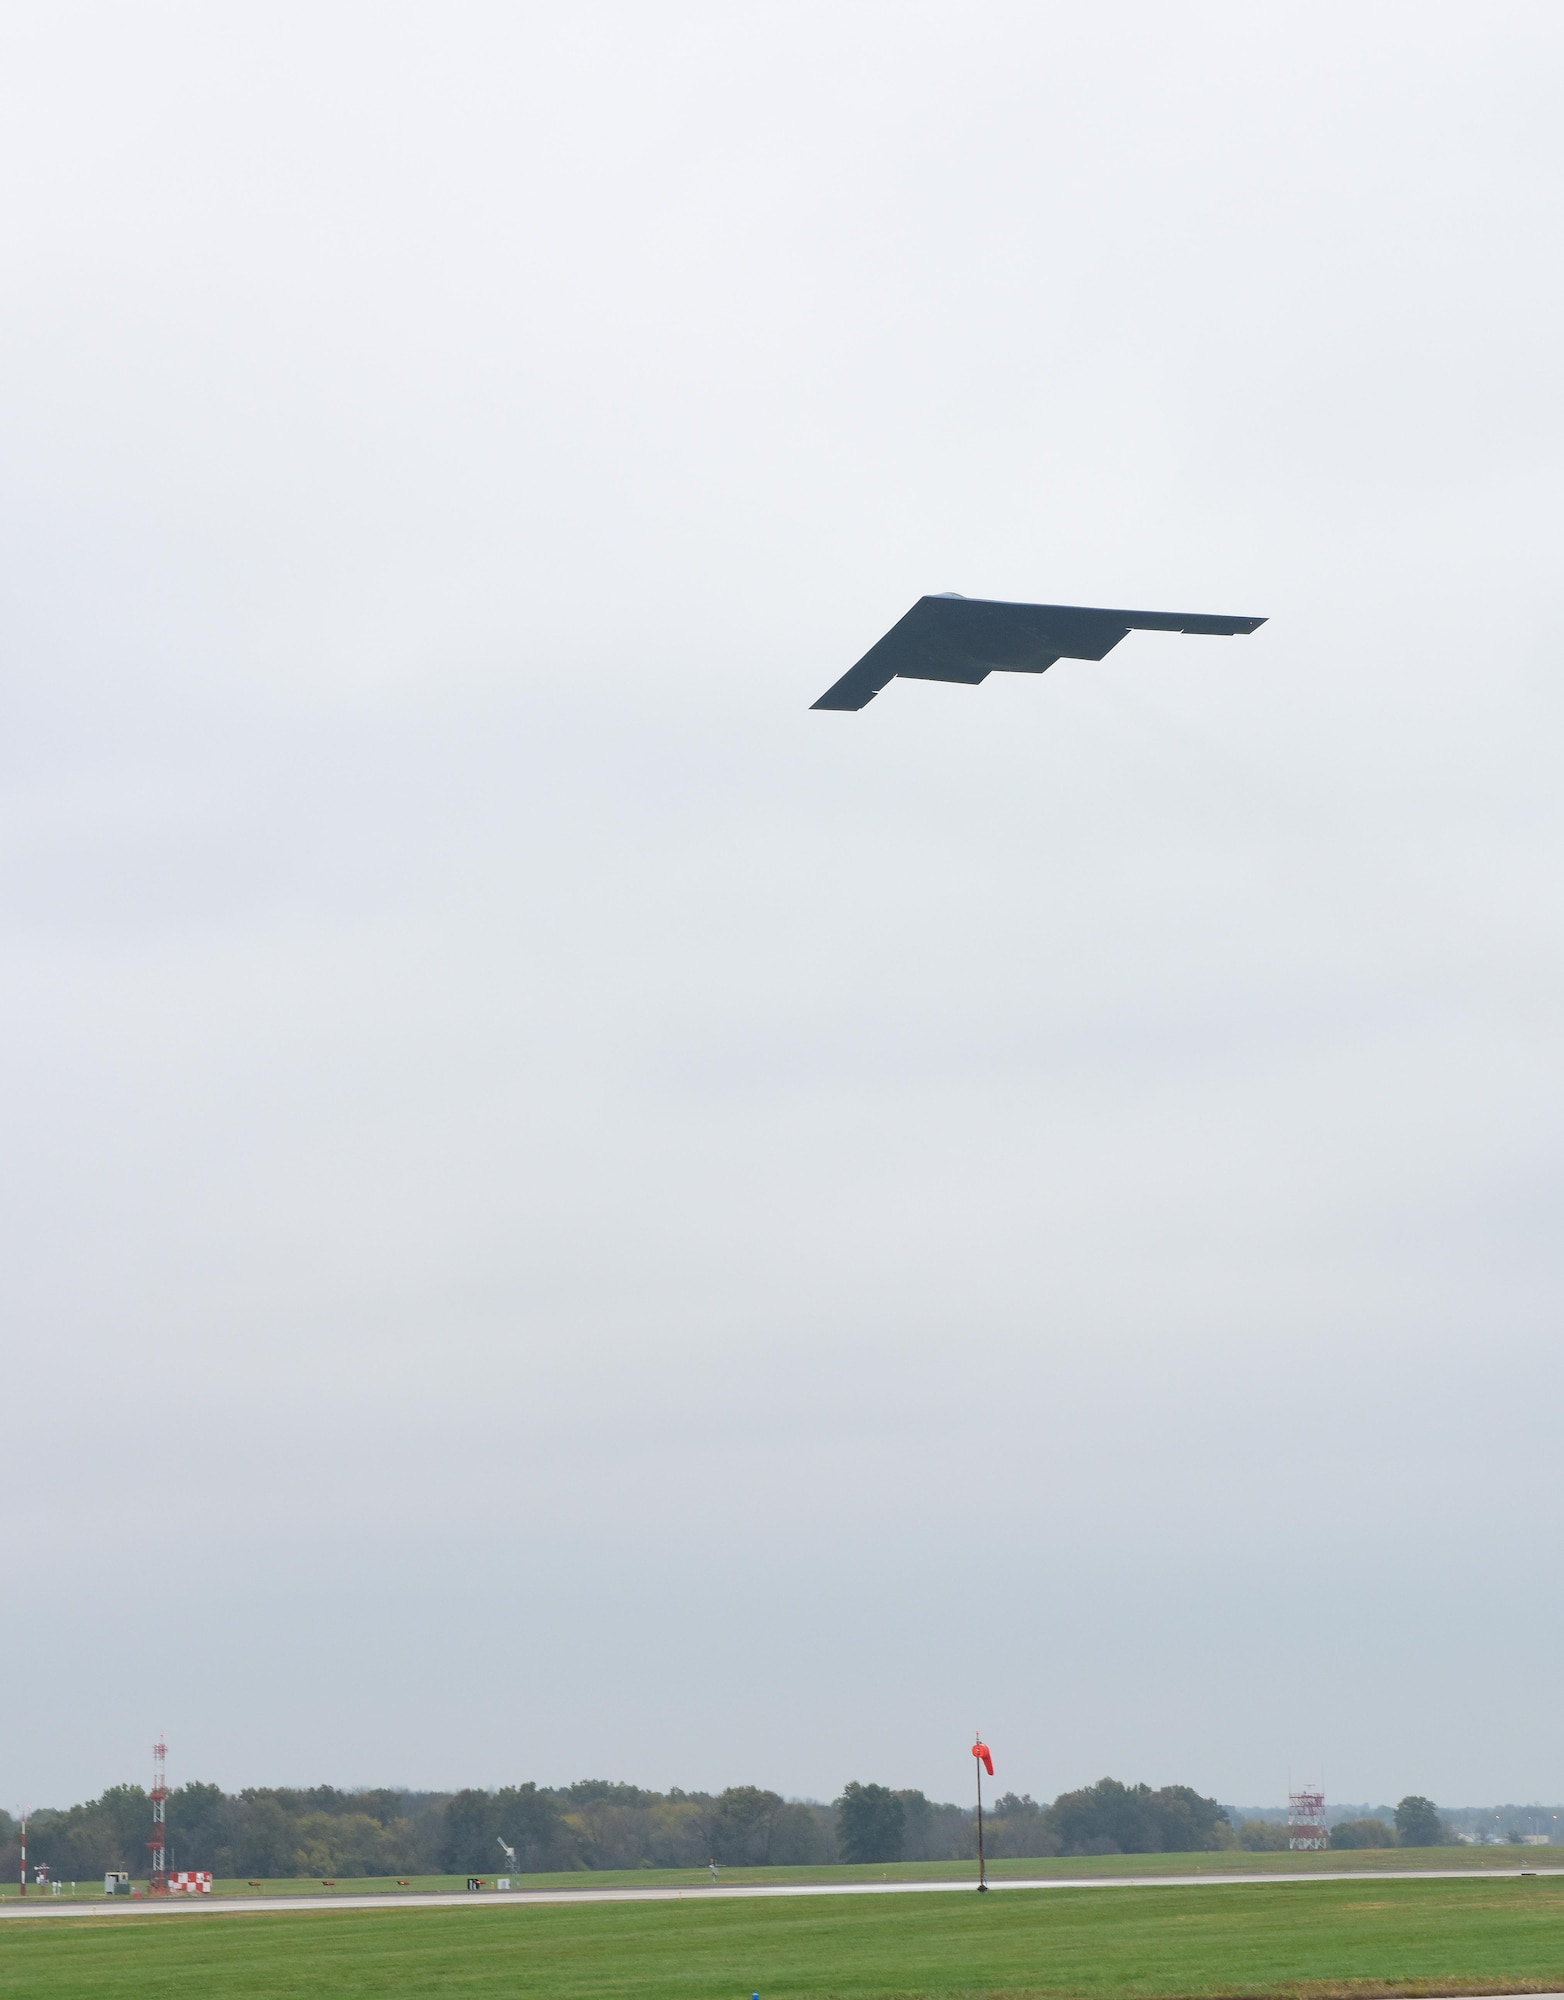 A U.S. Air Force B-2 Spirit assigned to Air Force Global Strike Command (AFGSC) takes off from the runway at Whiteman Air Force Base, Mo., Oct 30, 2016, during exercise Global Thunder 17. AFGSC supports U.S. Strategic Command's (USSTRATCOM) global strike and nuclear deterrence missions by providing strategic assets, including bombers like the B-52 and B-2, to ensure a safe, secure, effective and ready deterrent force. Global Thunder is an annual training event that assesses command and control functionality in all USSTRATCOM mission areas and affords component commands a venue to evaluate their joint operational readiness.(U.S. Air Force photo by Senior Airman Joel Pfiester)